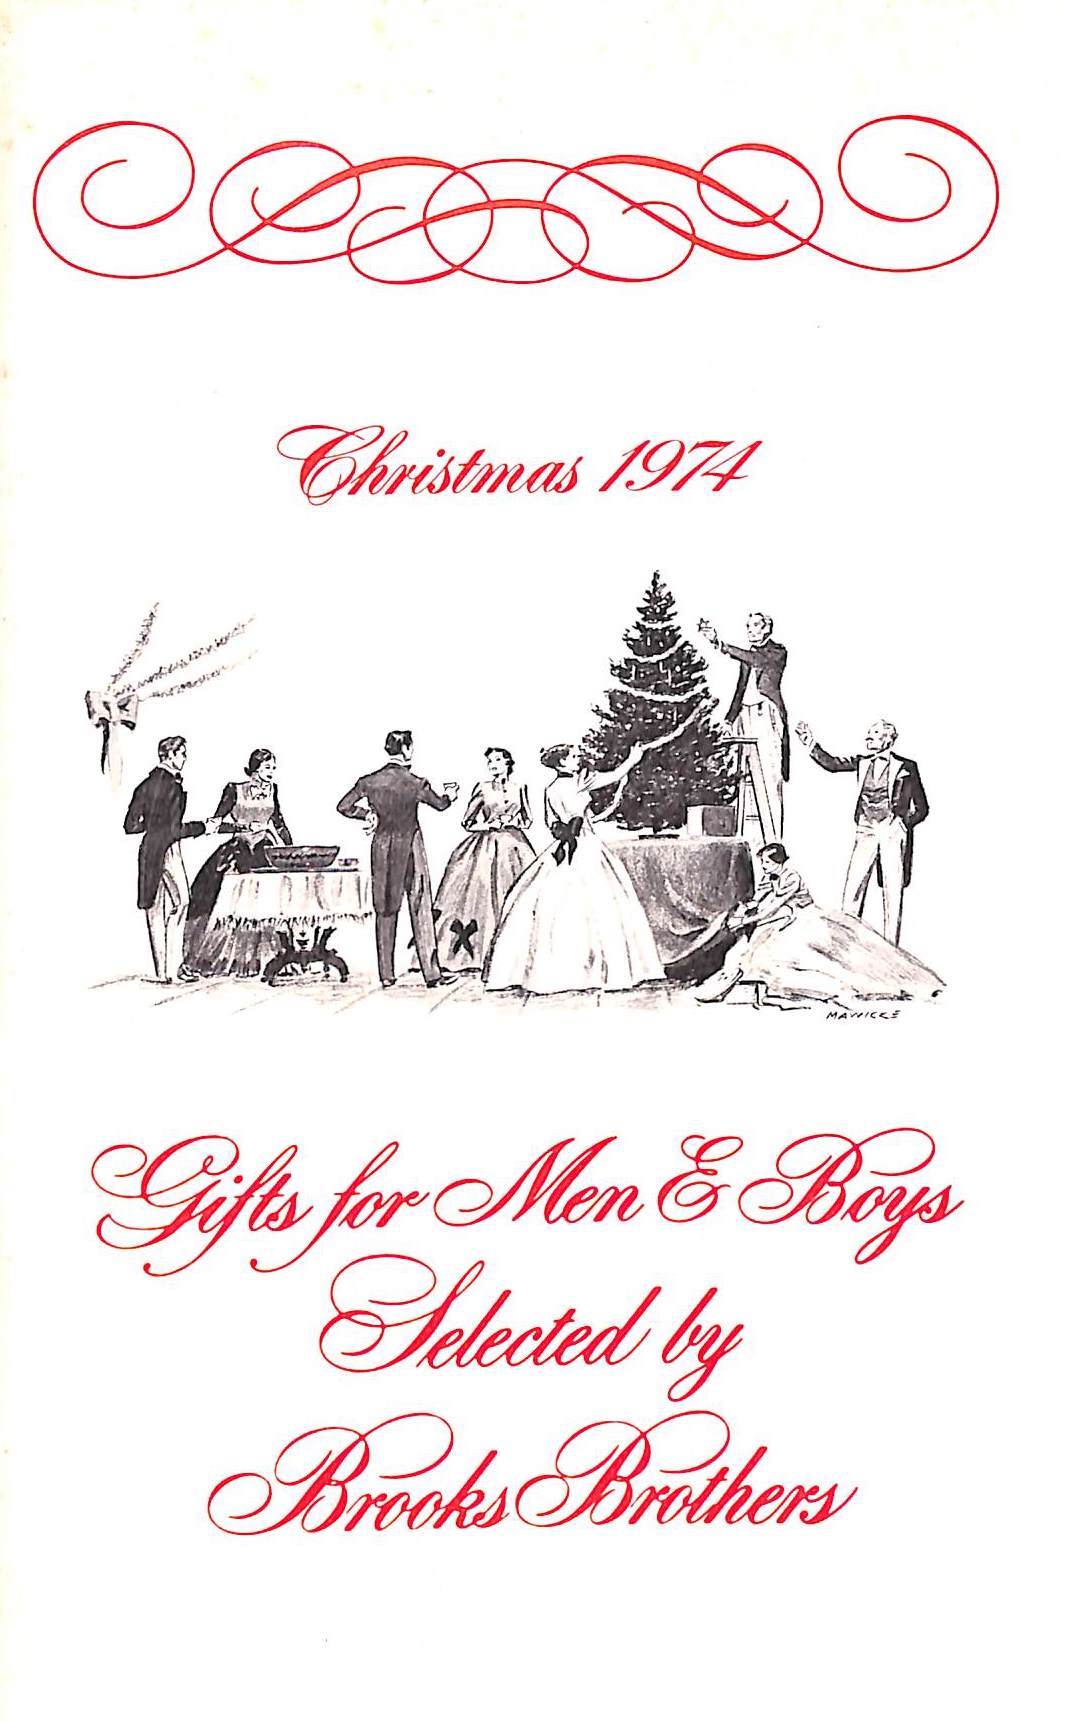 "Brooks Brothers Christmas 1974 Gifts For Men & Boys Catalog"